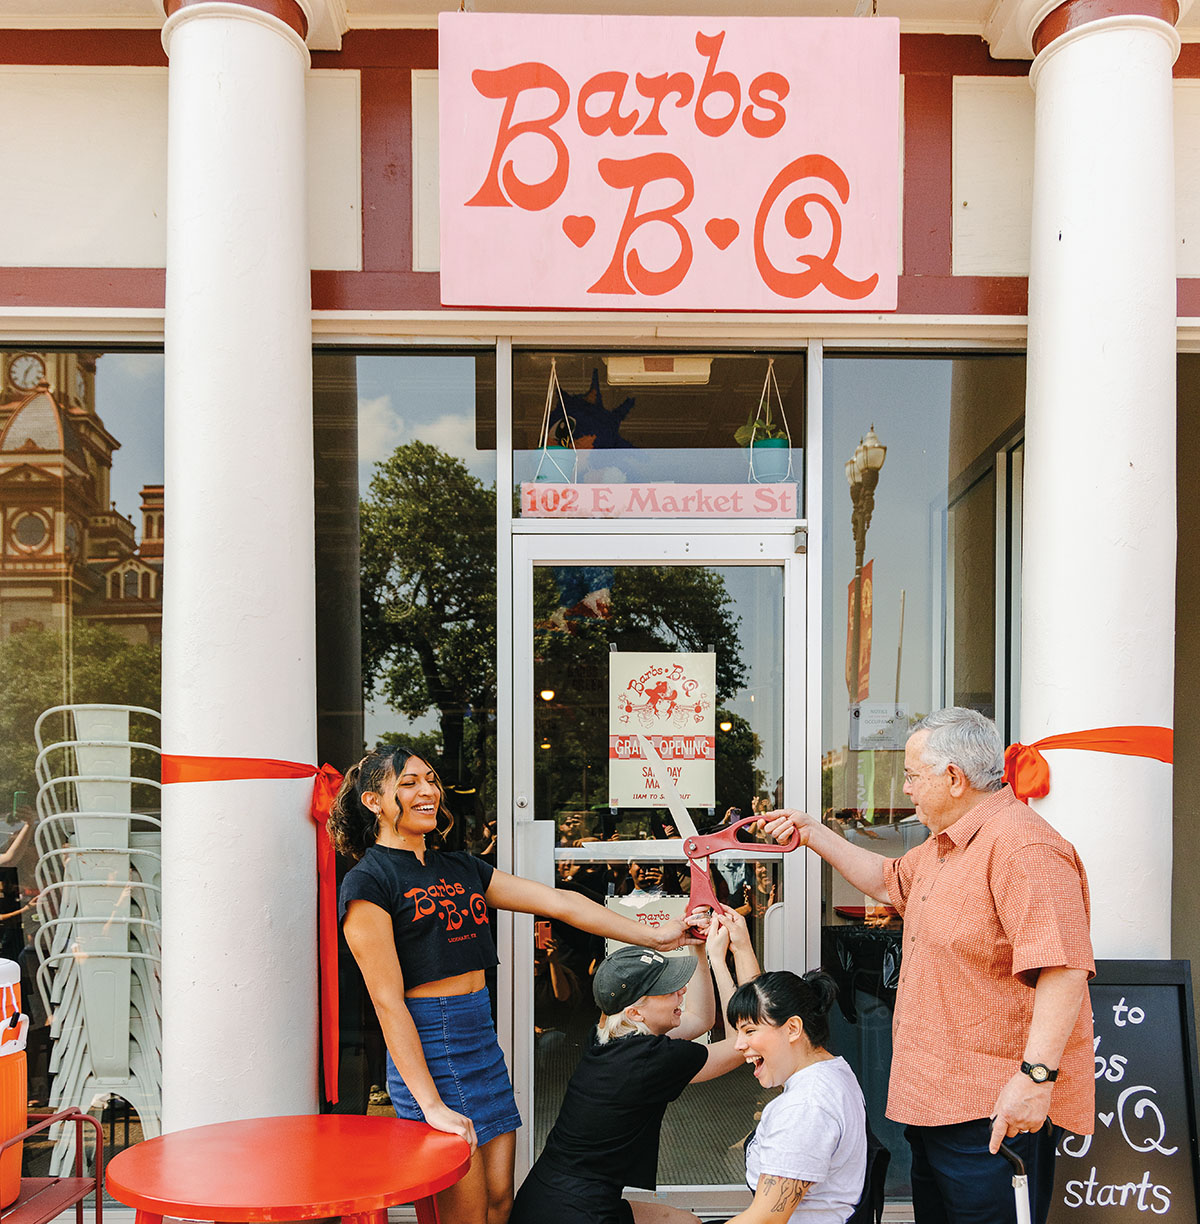 A group of people cut a large ribbon in front of a building with a pink sign reading "Barbs B-Q"